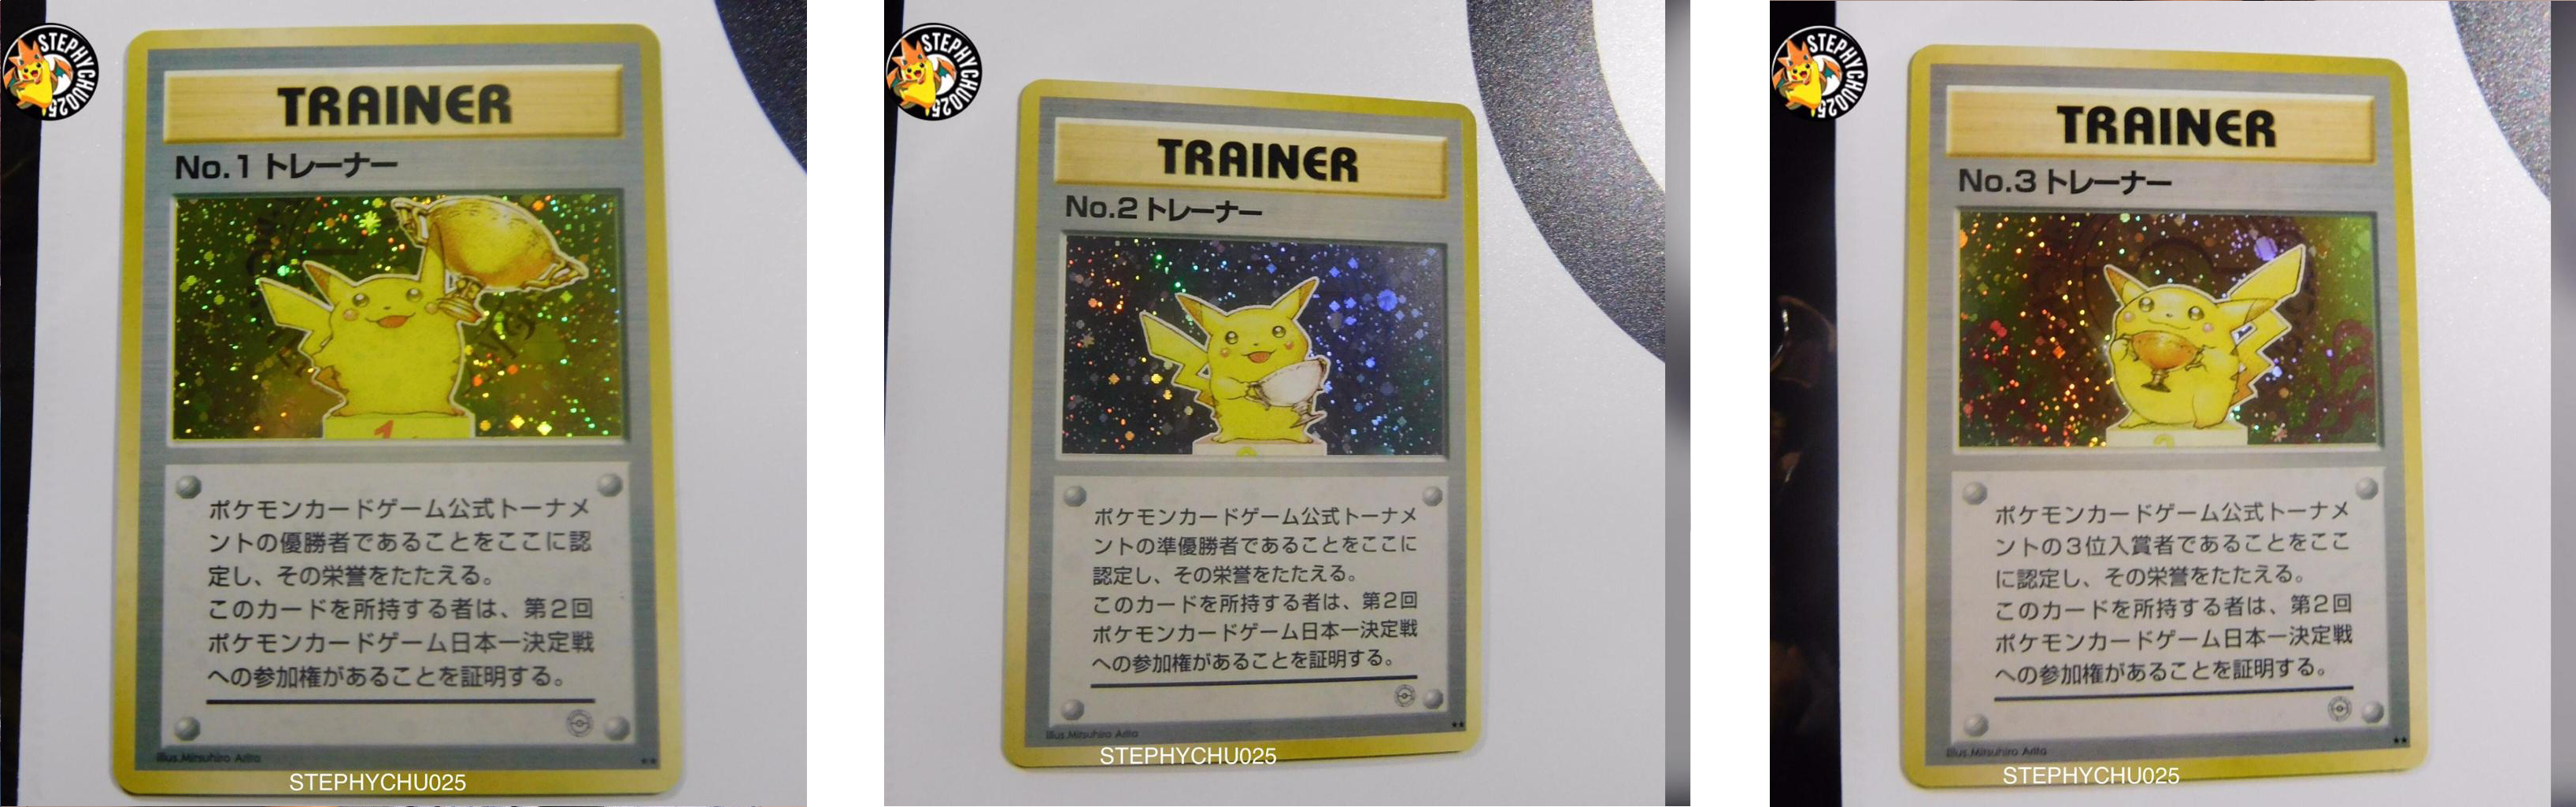 10 Rare Pokemon Cards On Snupps The Pokemon Trading Game Was First By Snupps Snupps Blog Medium